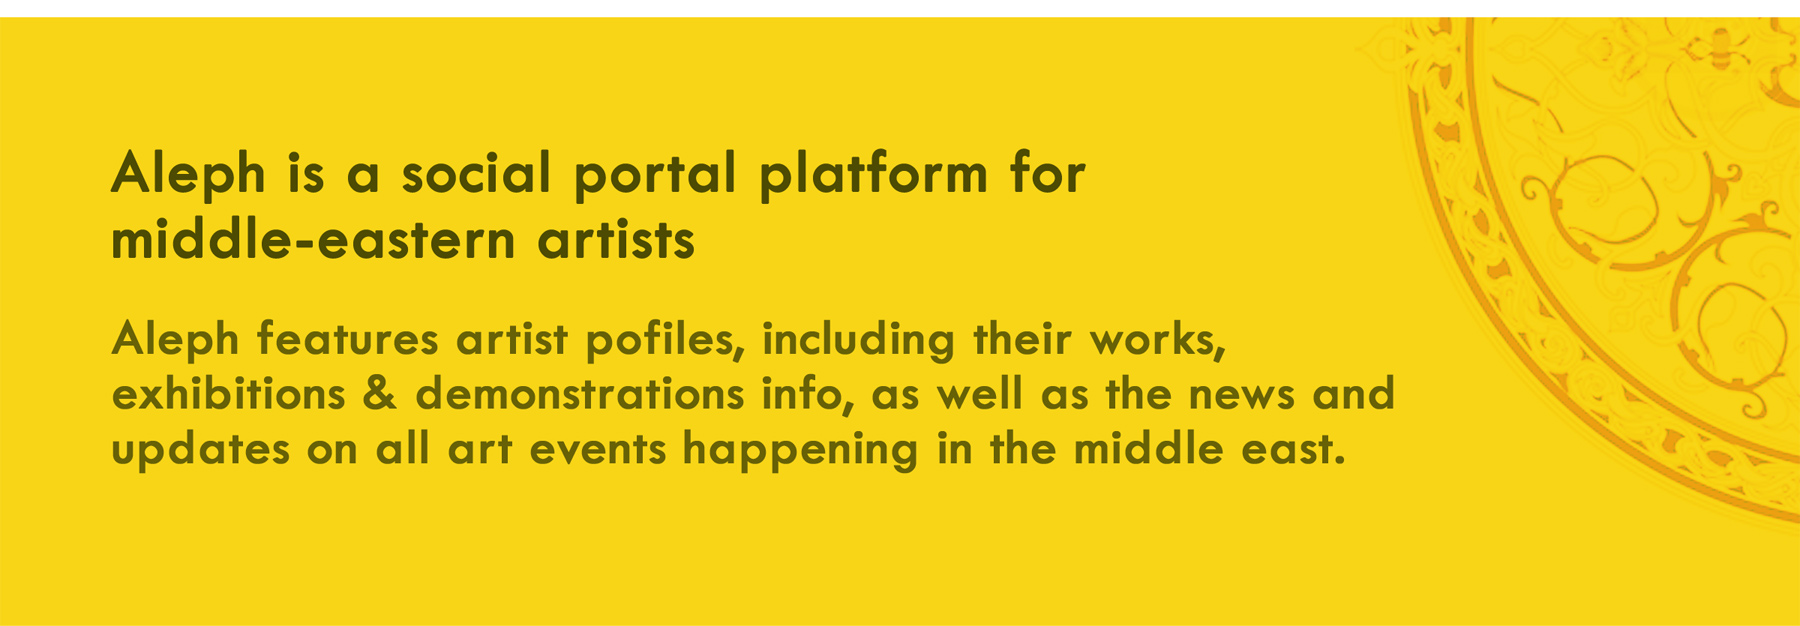 Aleph features artist pofiles, including their works, exhibitions & demonstrations info, as well as the news and  updates on all art events happening in the middle east.